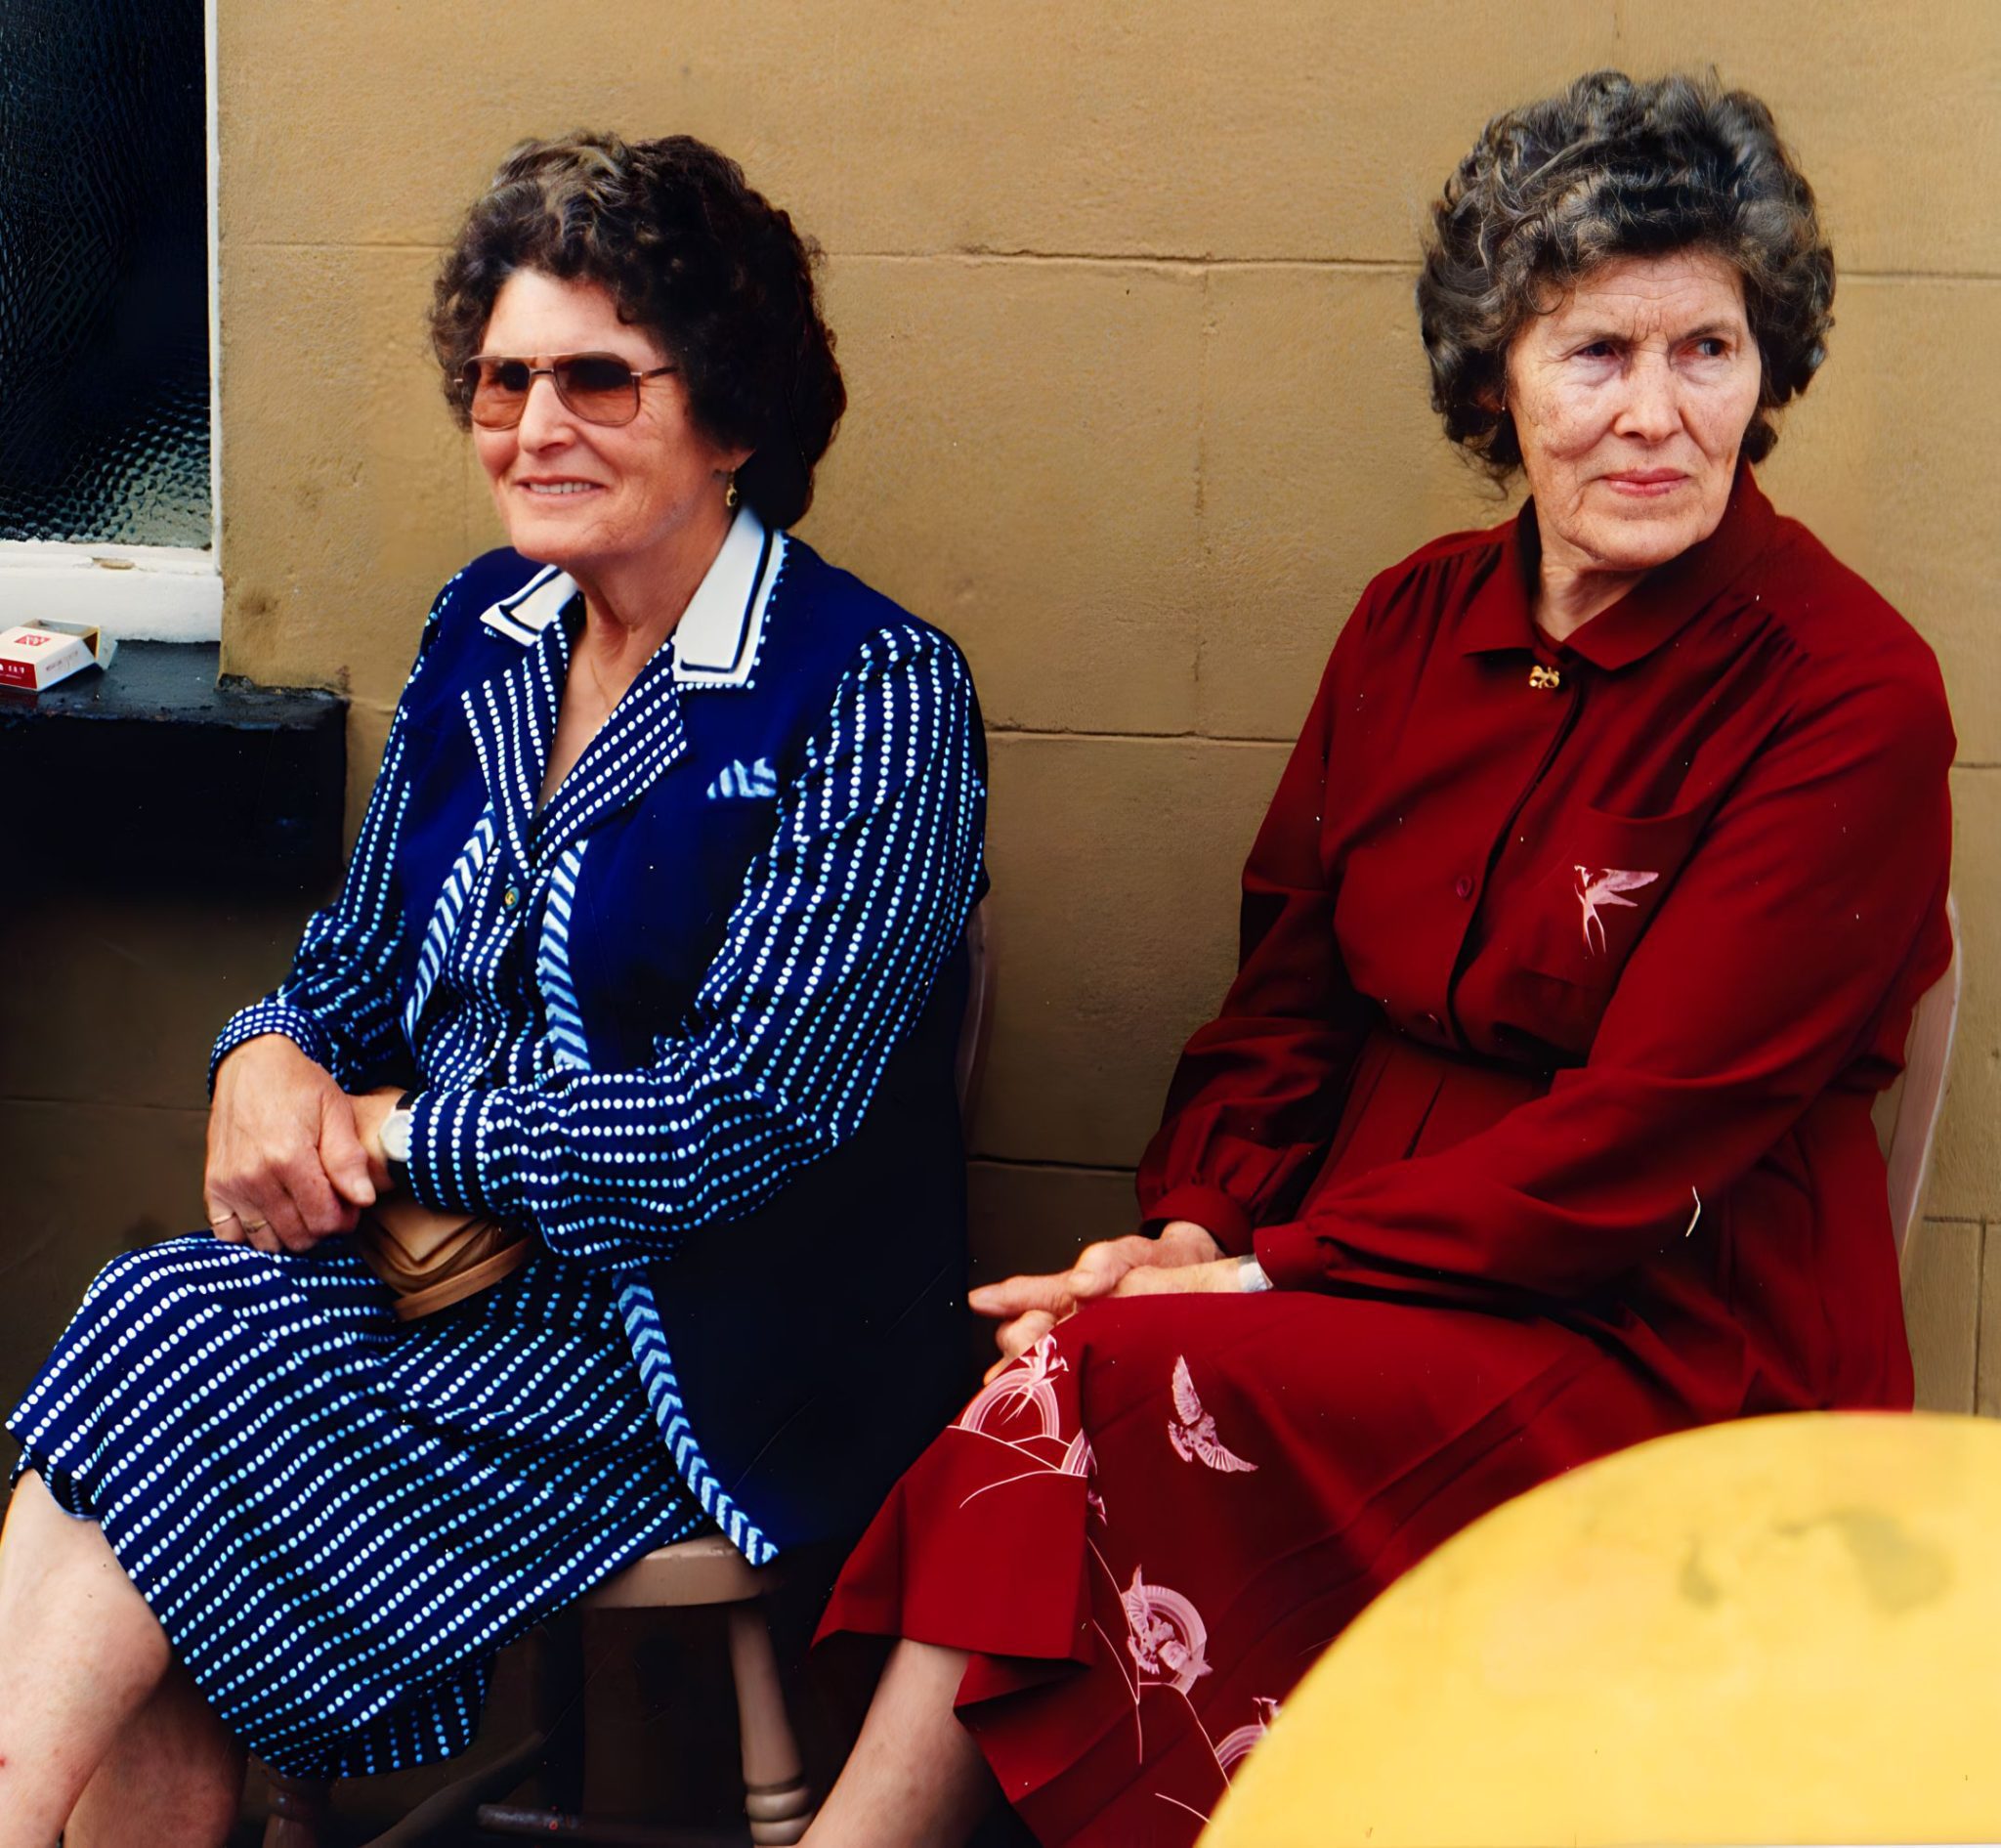 Colour photograph of the Keane sisters, Sarah and Rita at the Mayo Fleadh Cheoil Day in the 1980s. 